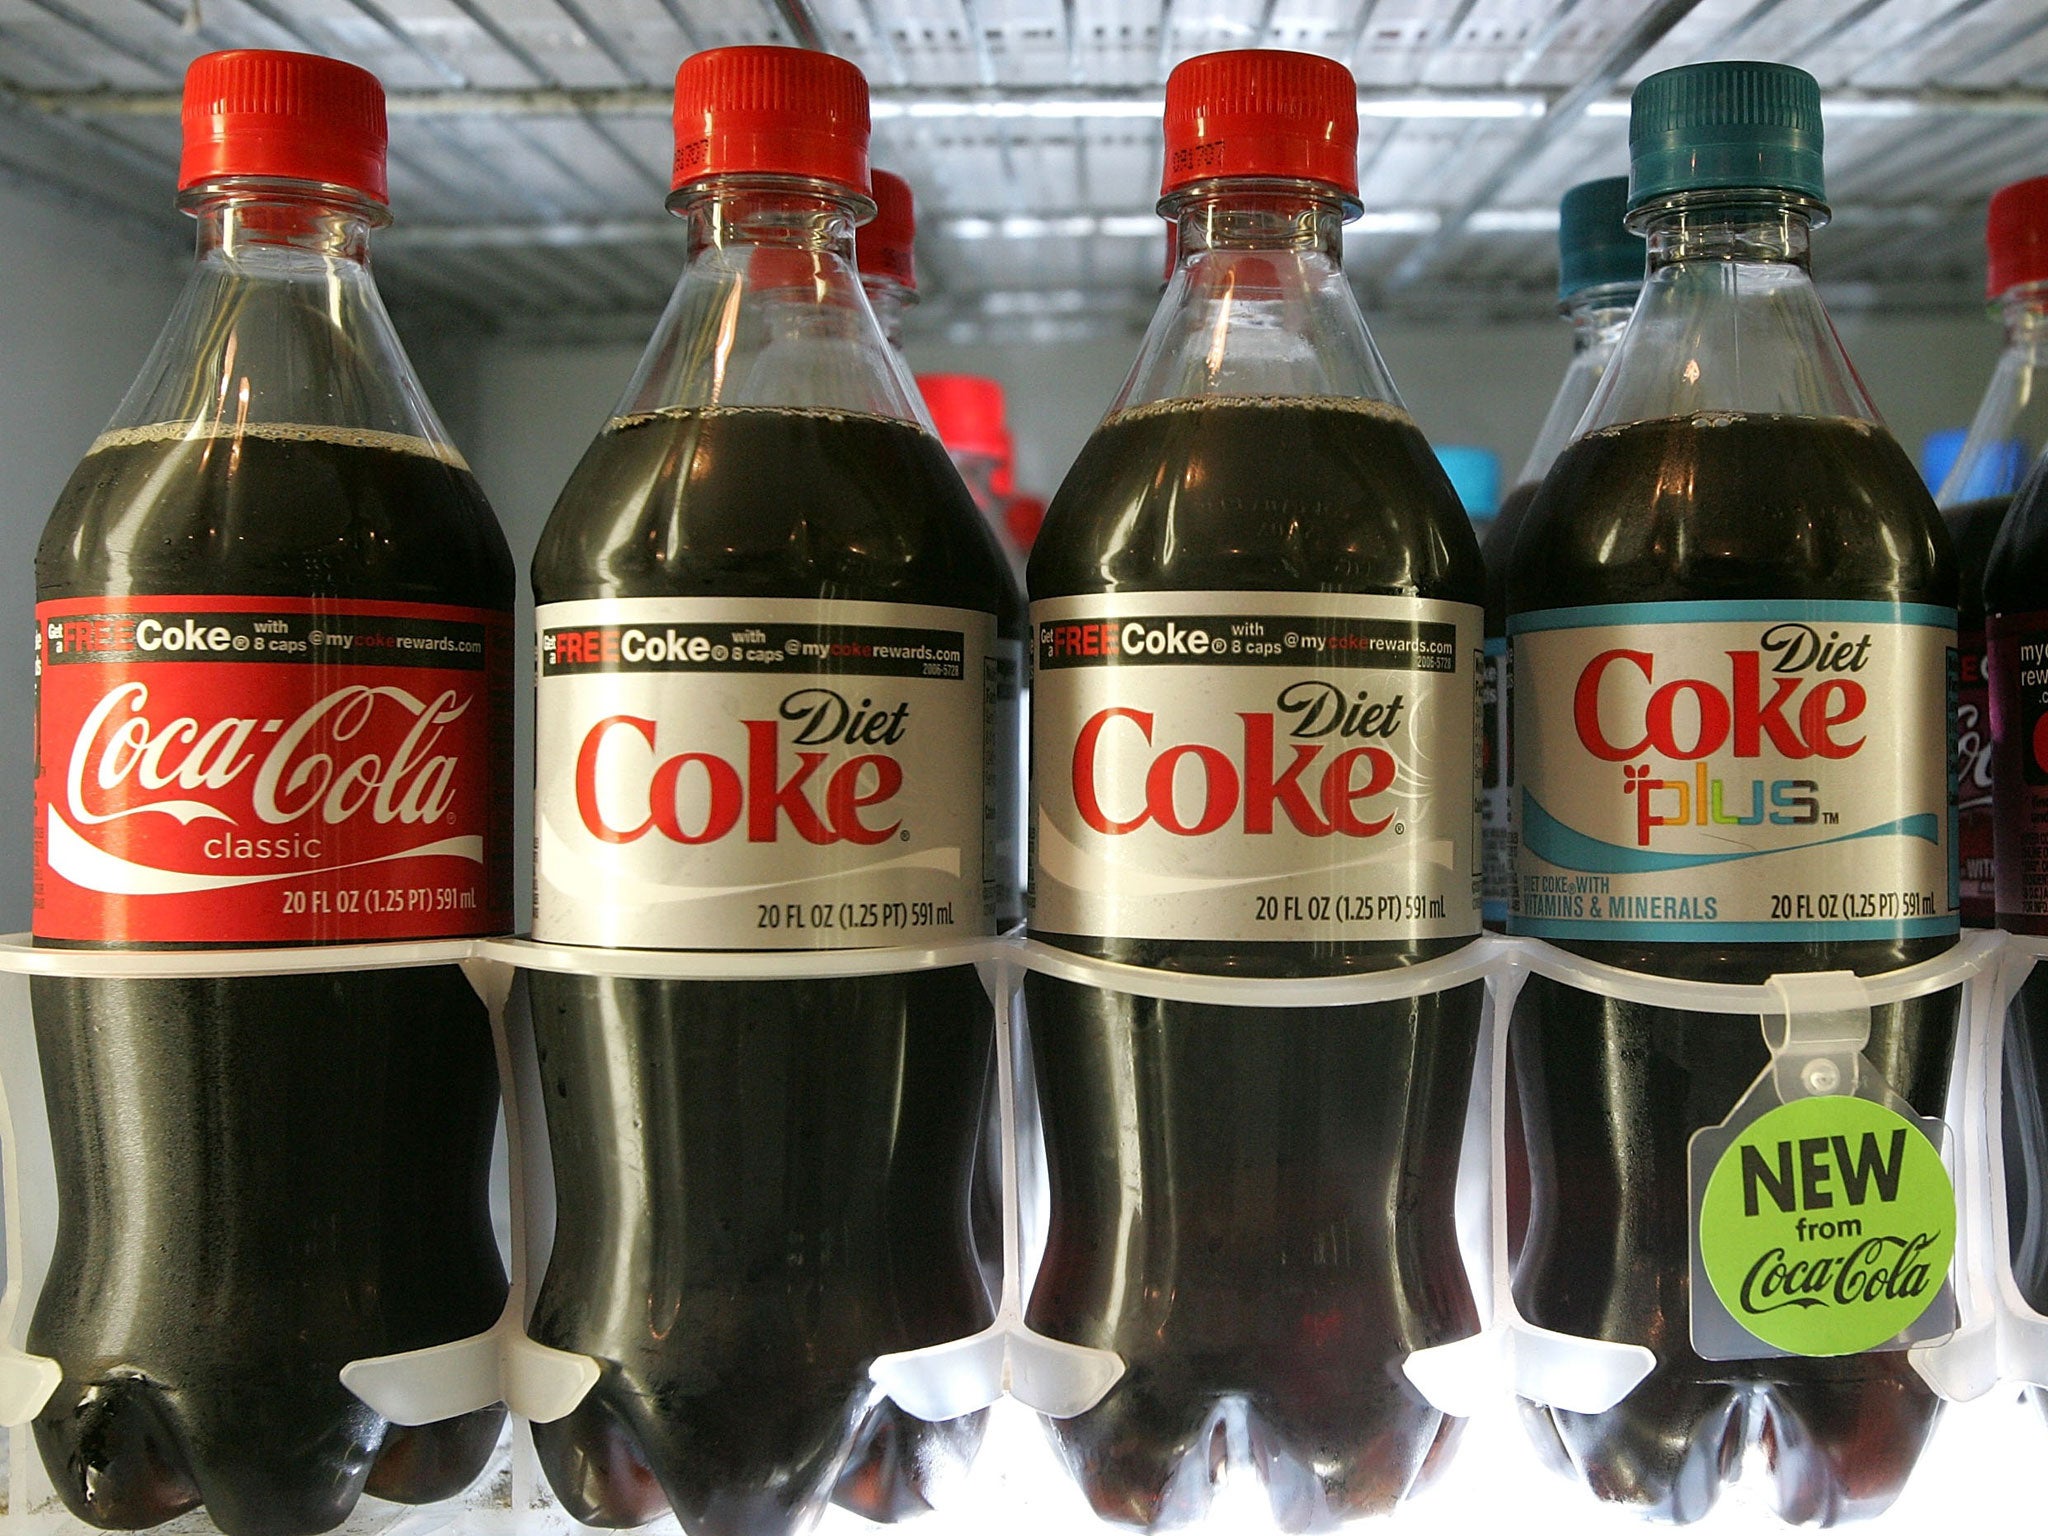 Bottles of Coca Cola are seen on a shelf at the Mayflower Market July 17, 2007 in San Francisco, California.